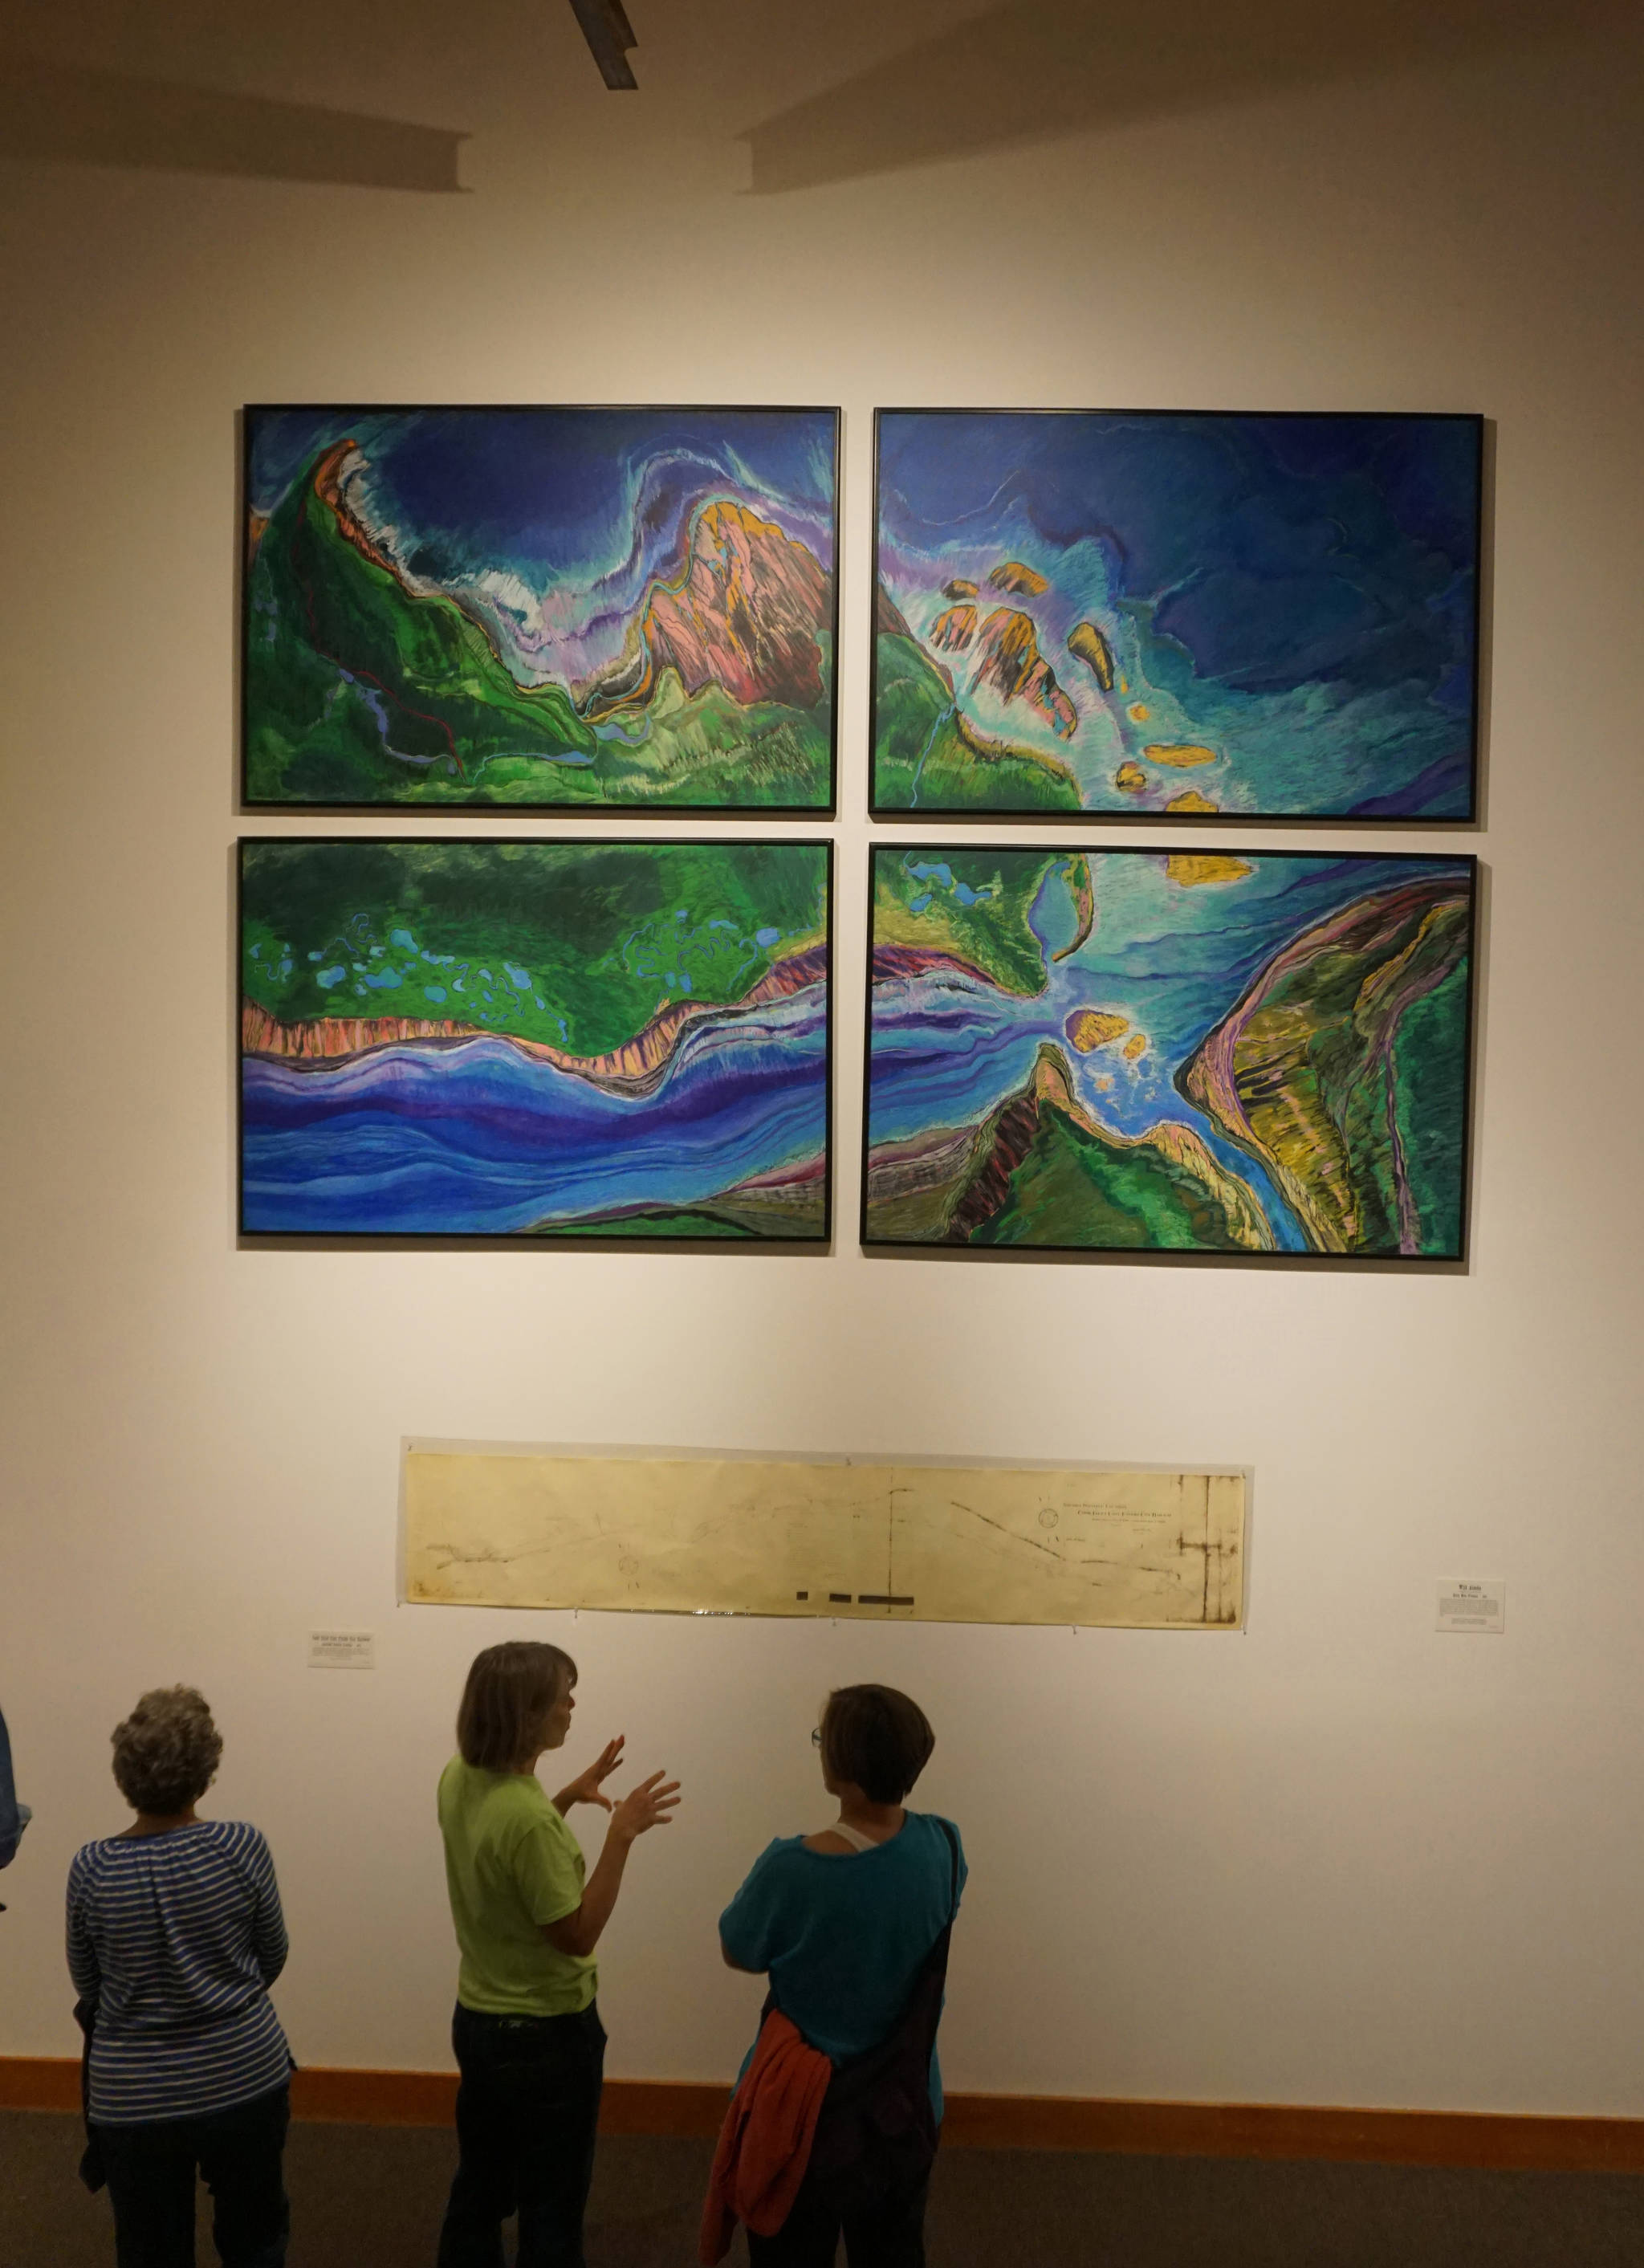 Visitors to the Pratt Museum look at “Wild Alaska,” above, by Karla Moss Freeman, and a 1900 map of the Cook Inlet Coal Fields railroad, one of the historic pieces included in cARTography exhibit Tuesday, Aug. 22, 2017 at the Pratt Museum, Homer, Alaska. (Photo by Michael Armstrong, Homer News)